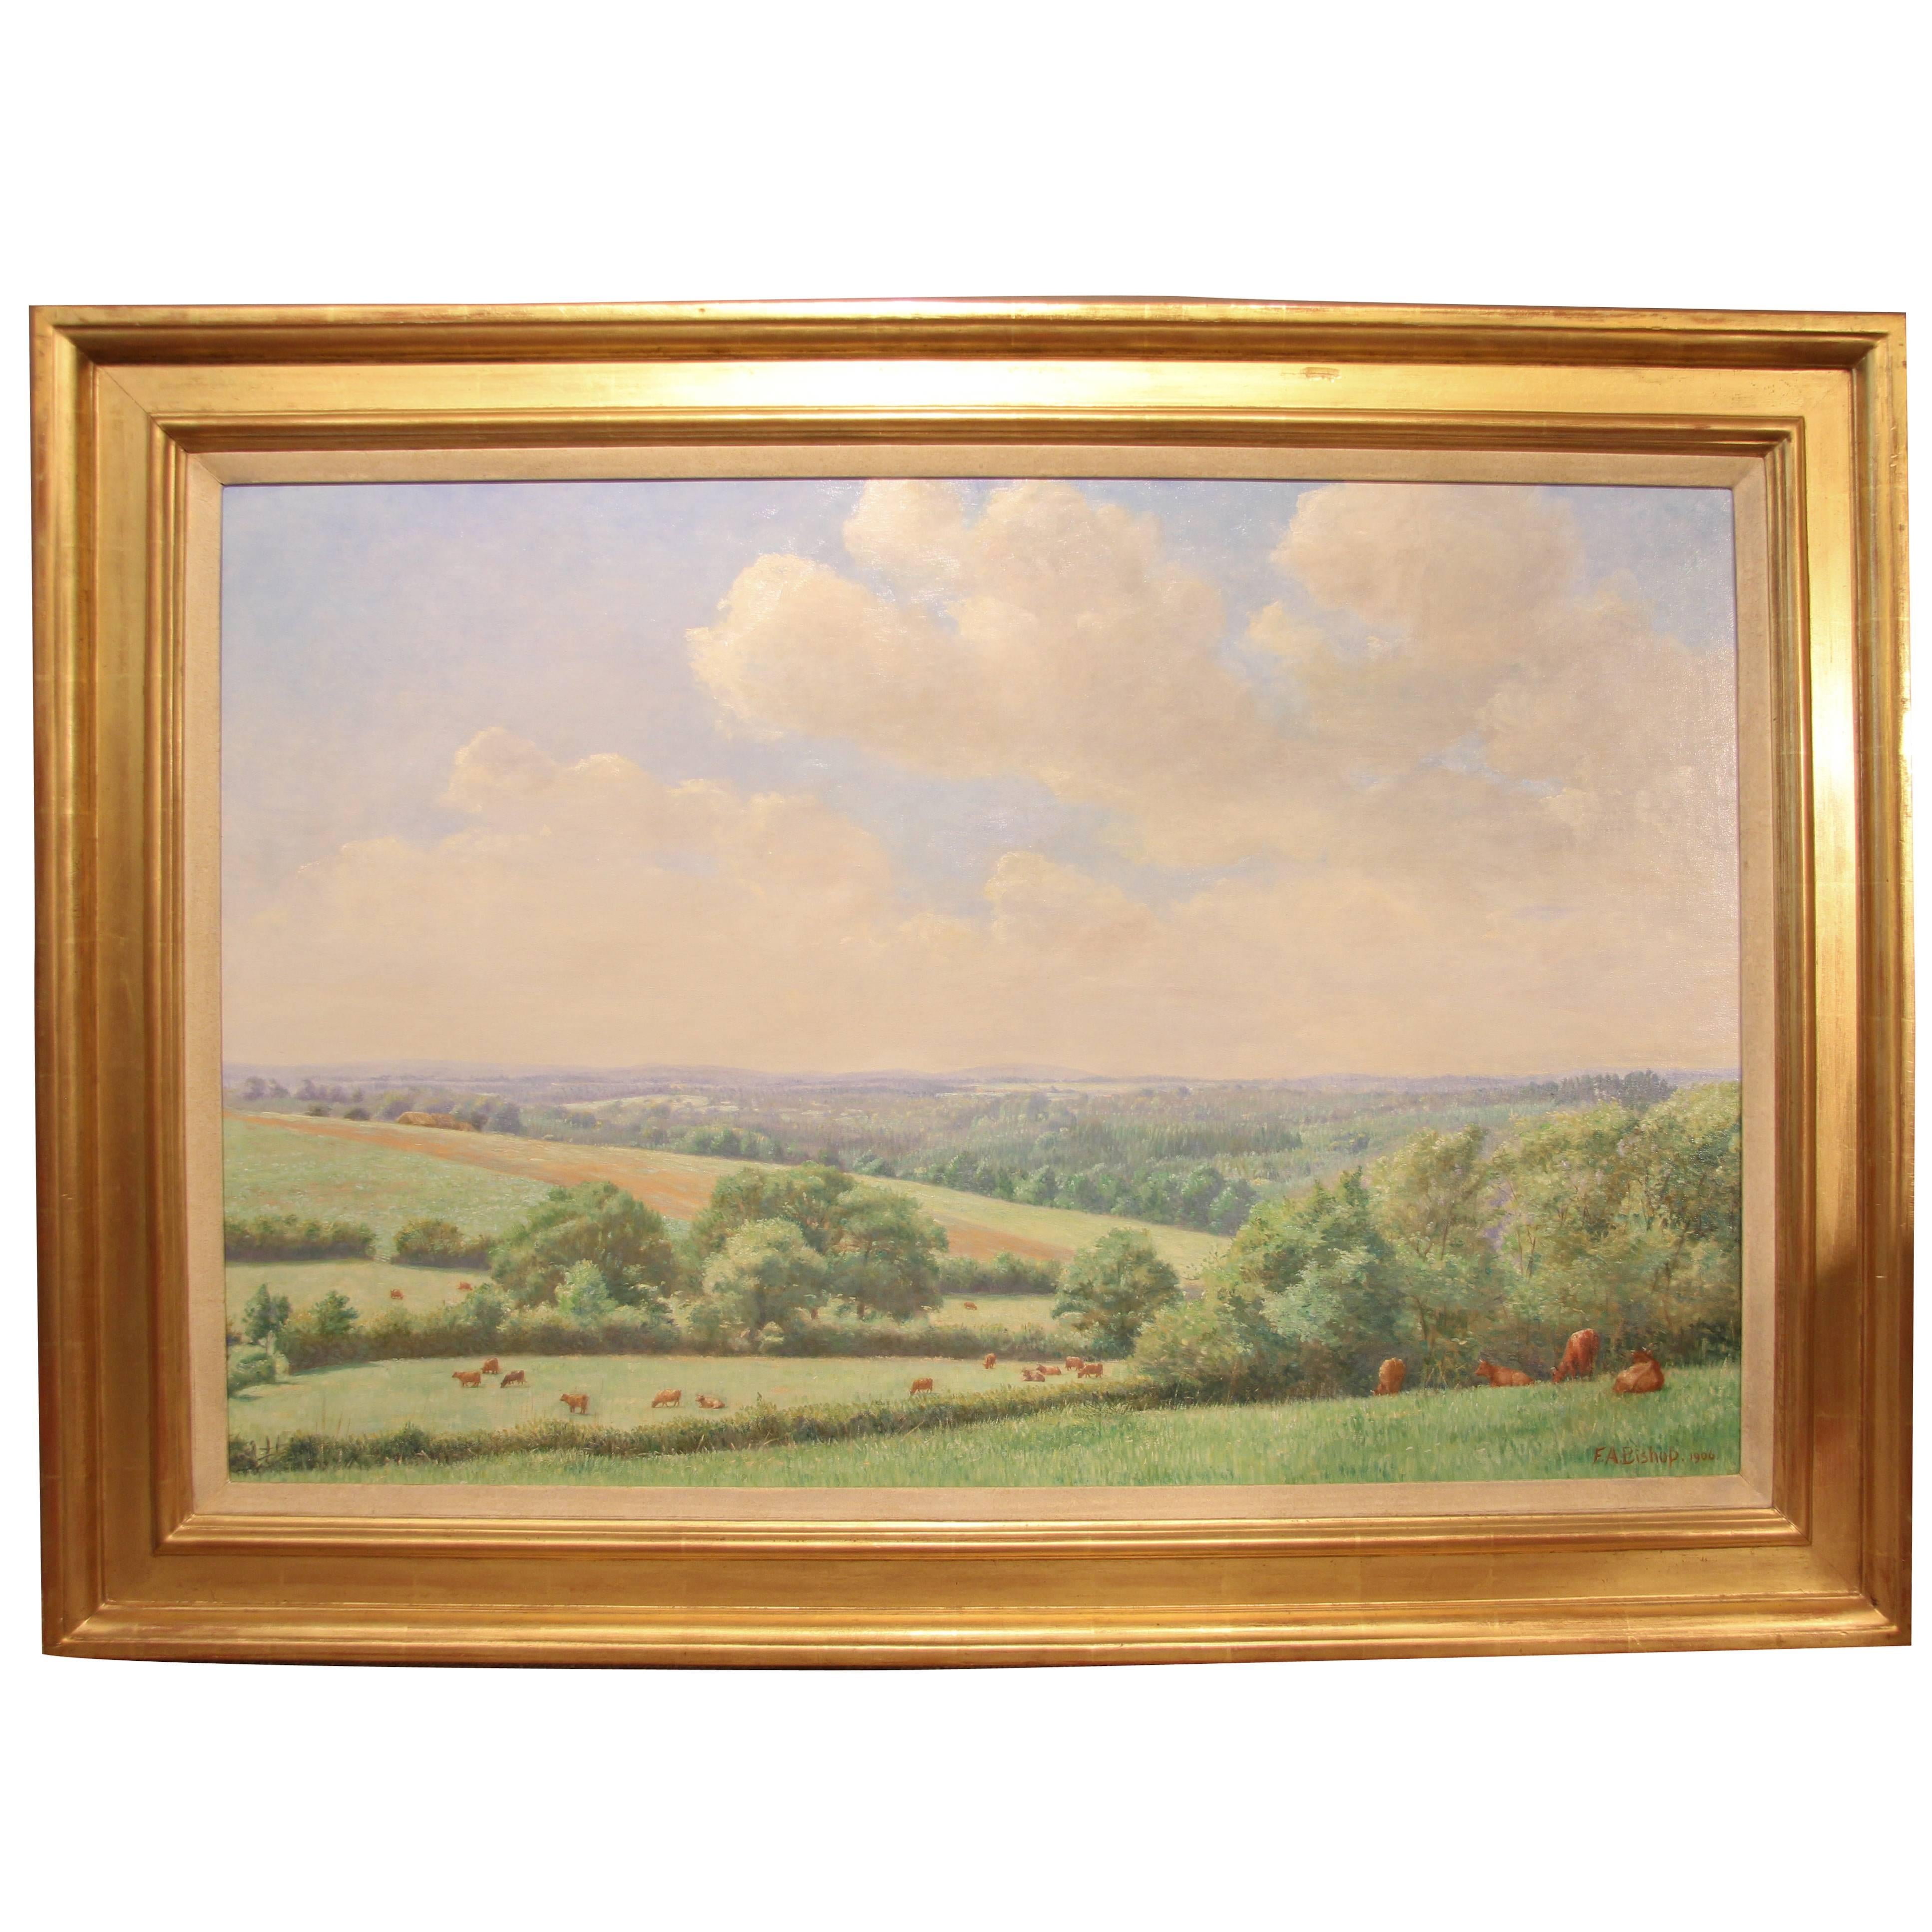 Landscape Oil Painting by Frederick A. Bishop, Signed 1906